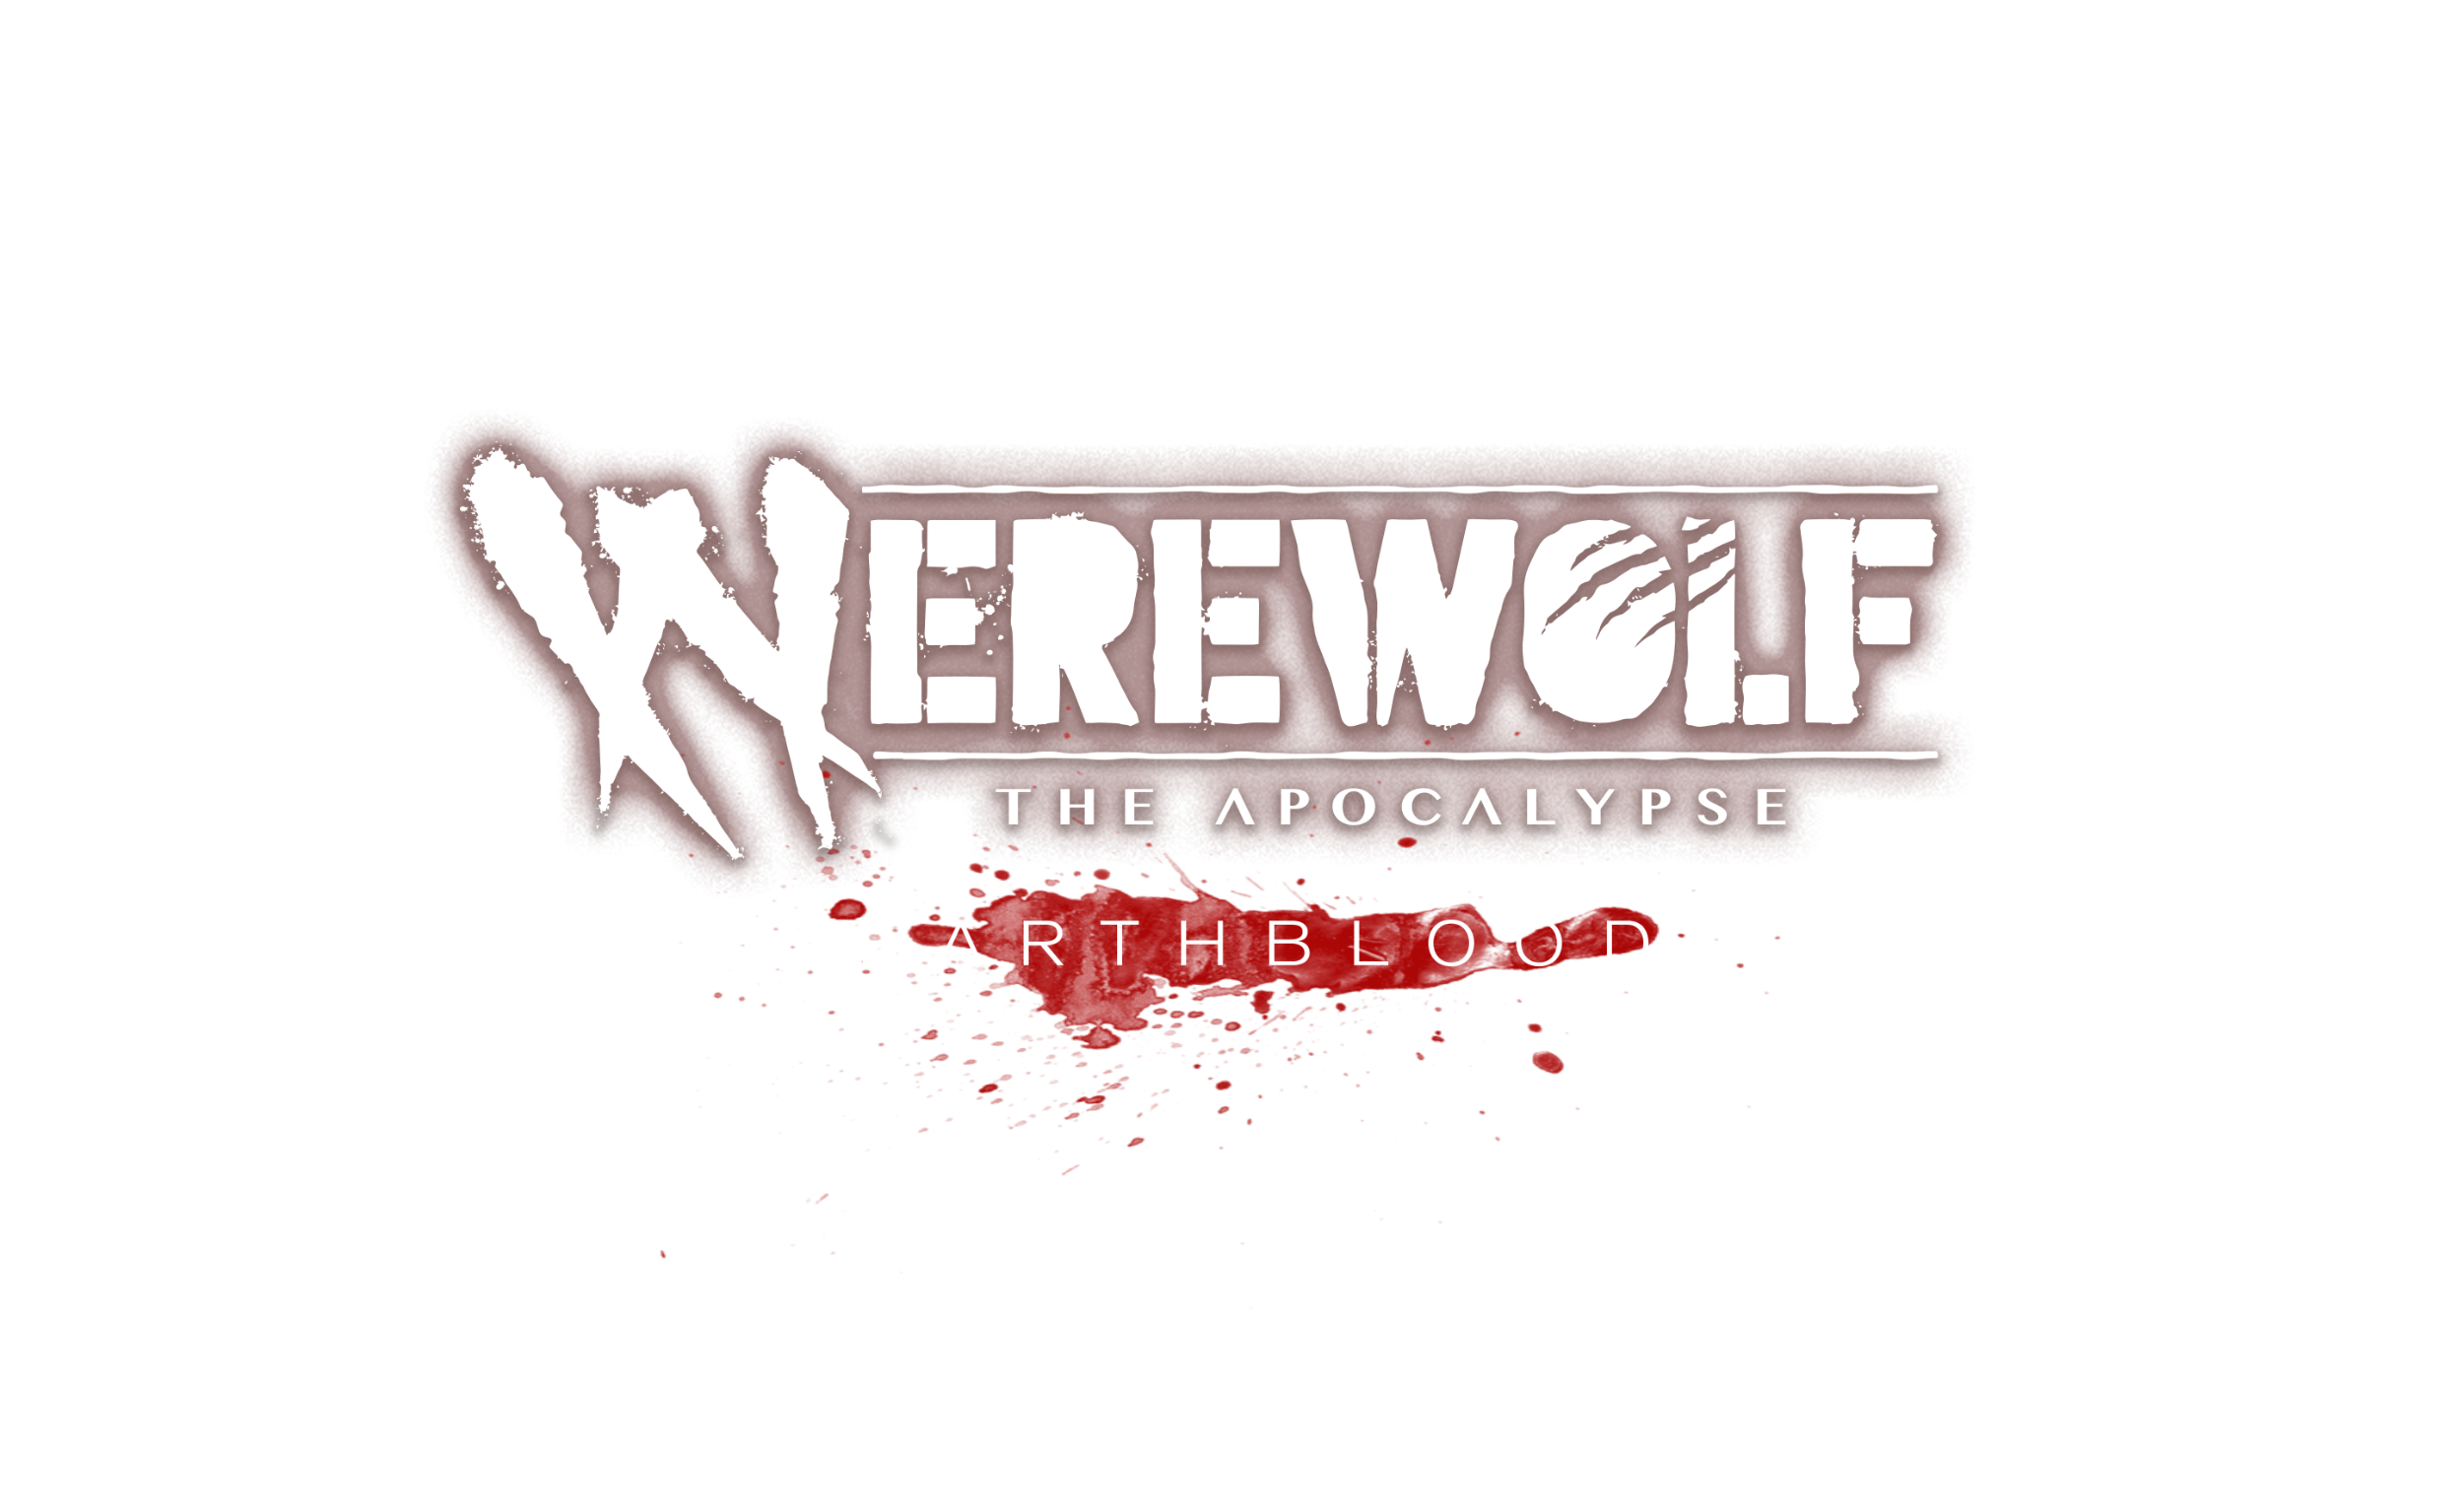 Werewolf-The-Apocalypse-Earthblood-codes-free-activation